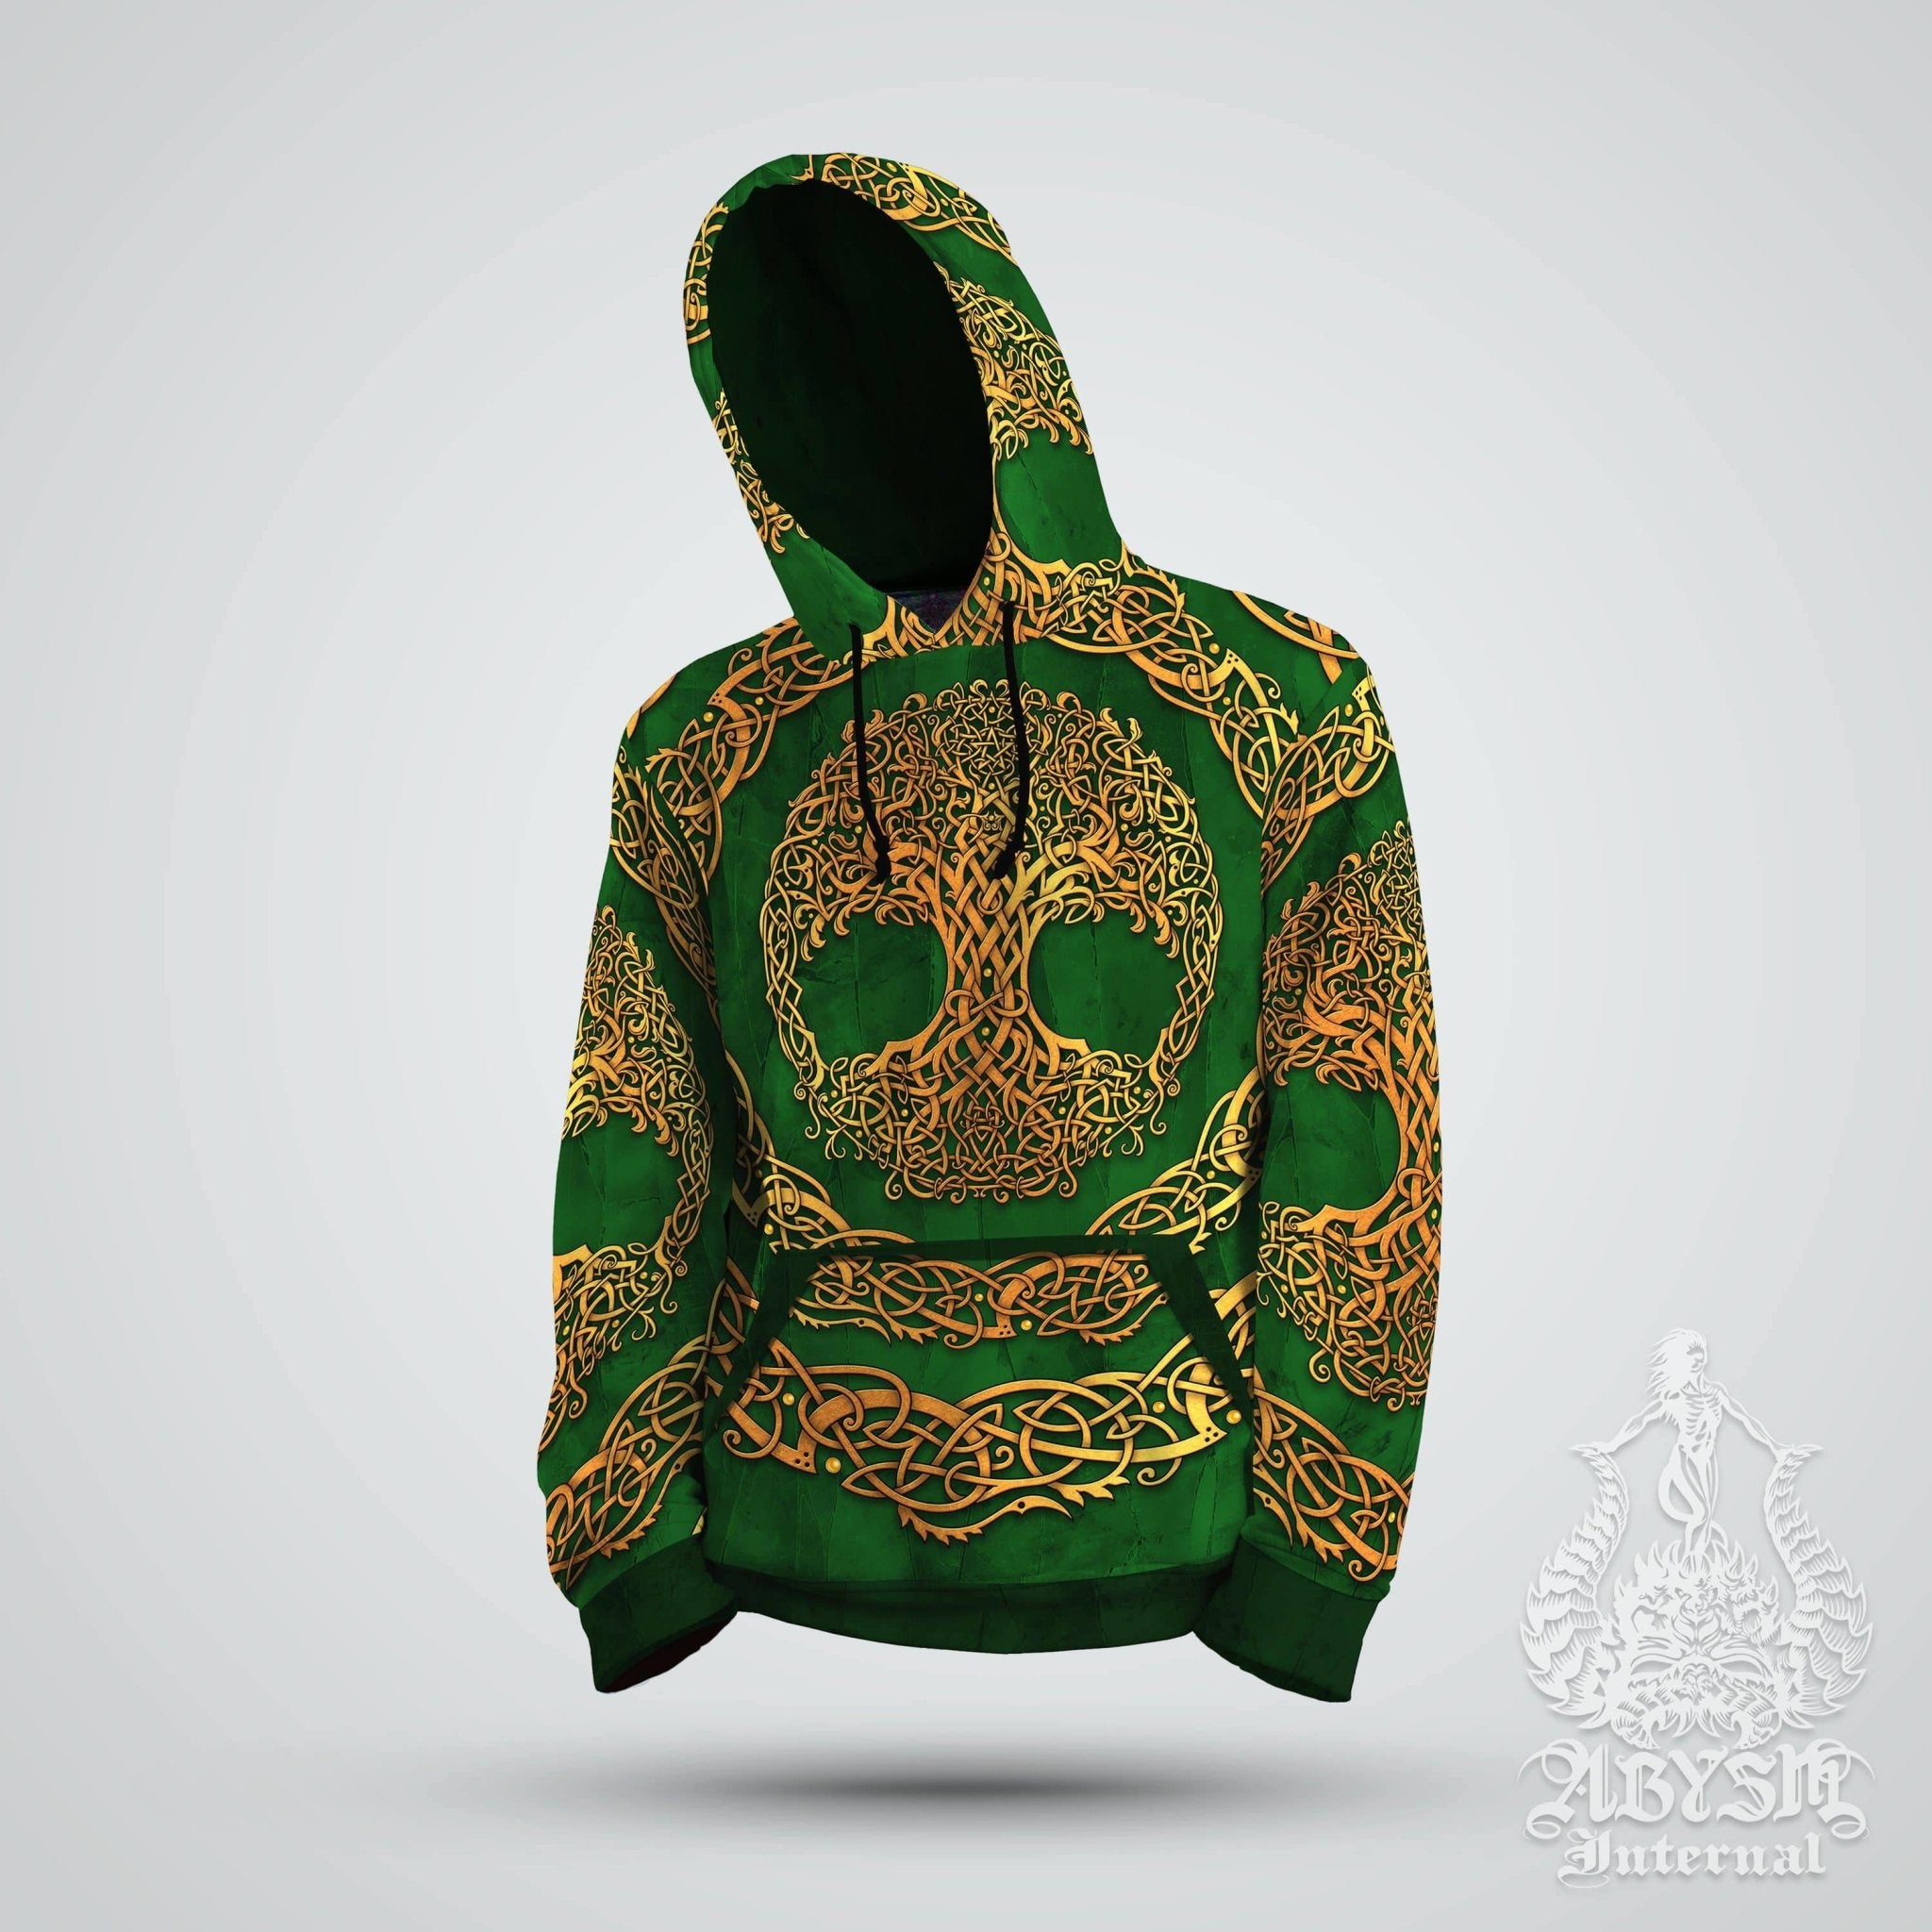 Tree of Life Hoodie, Boho Outfit, Indie Sweater, Witchy Streetwear, Alternative Clothing, Unisex - Celtic, Gold Green - Abysm Internal